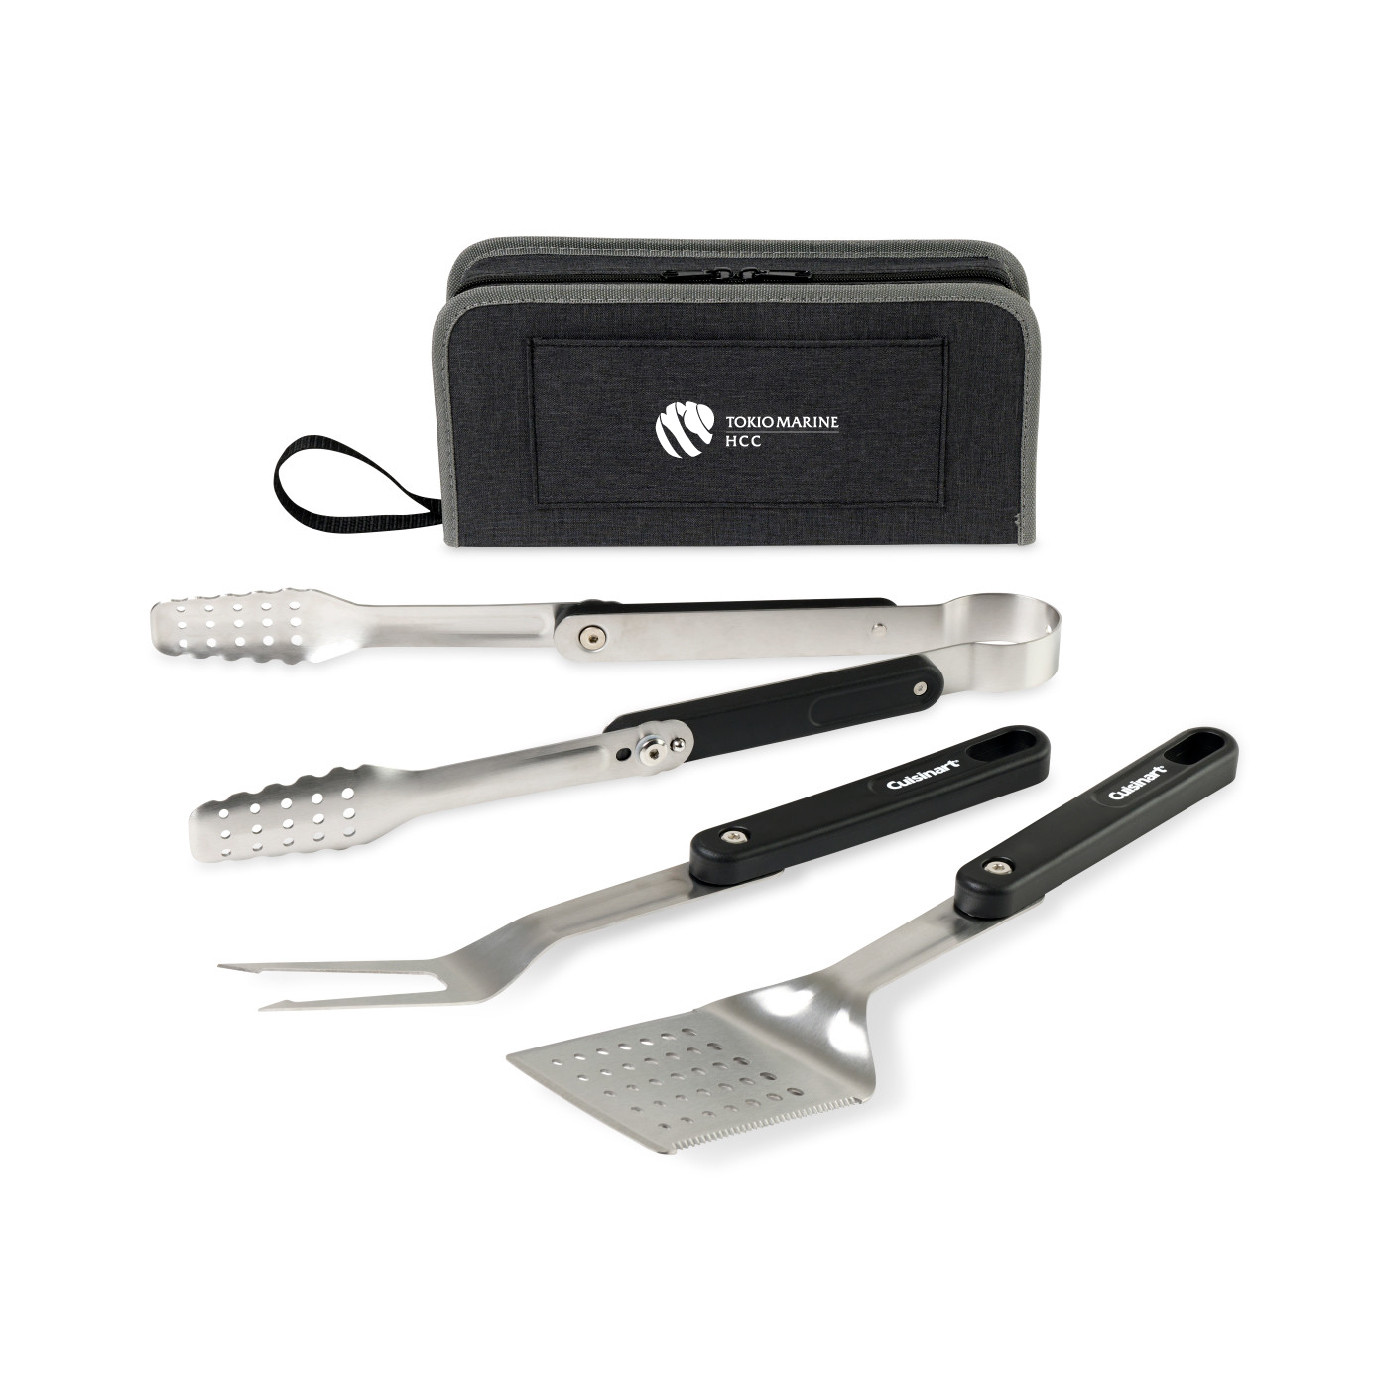 Gifts | Cuisinart 4-Piece Folding Grill Tool Set | 5509